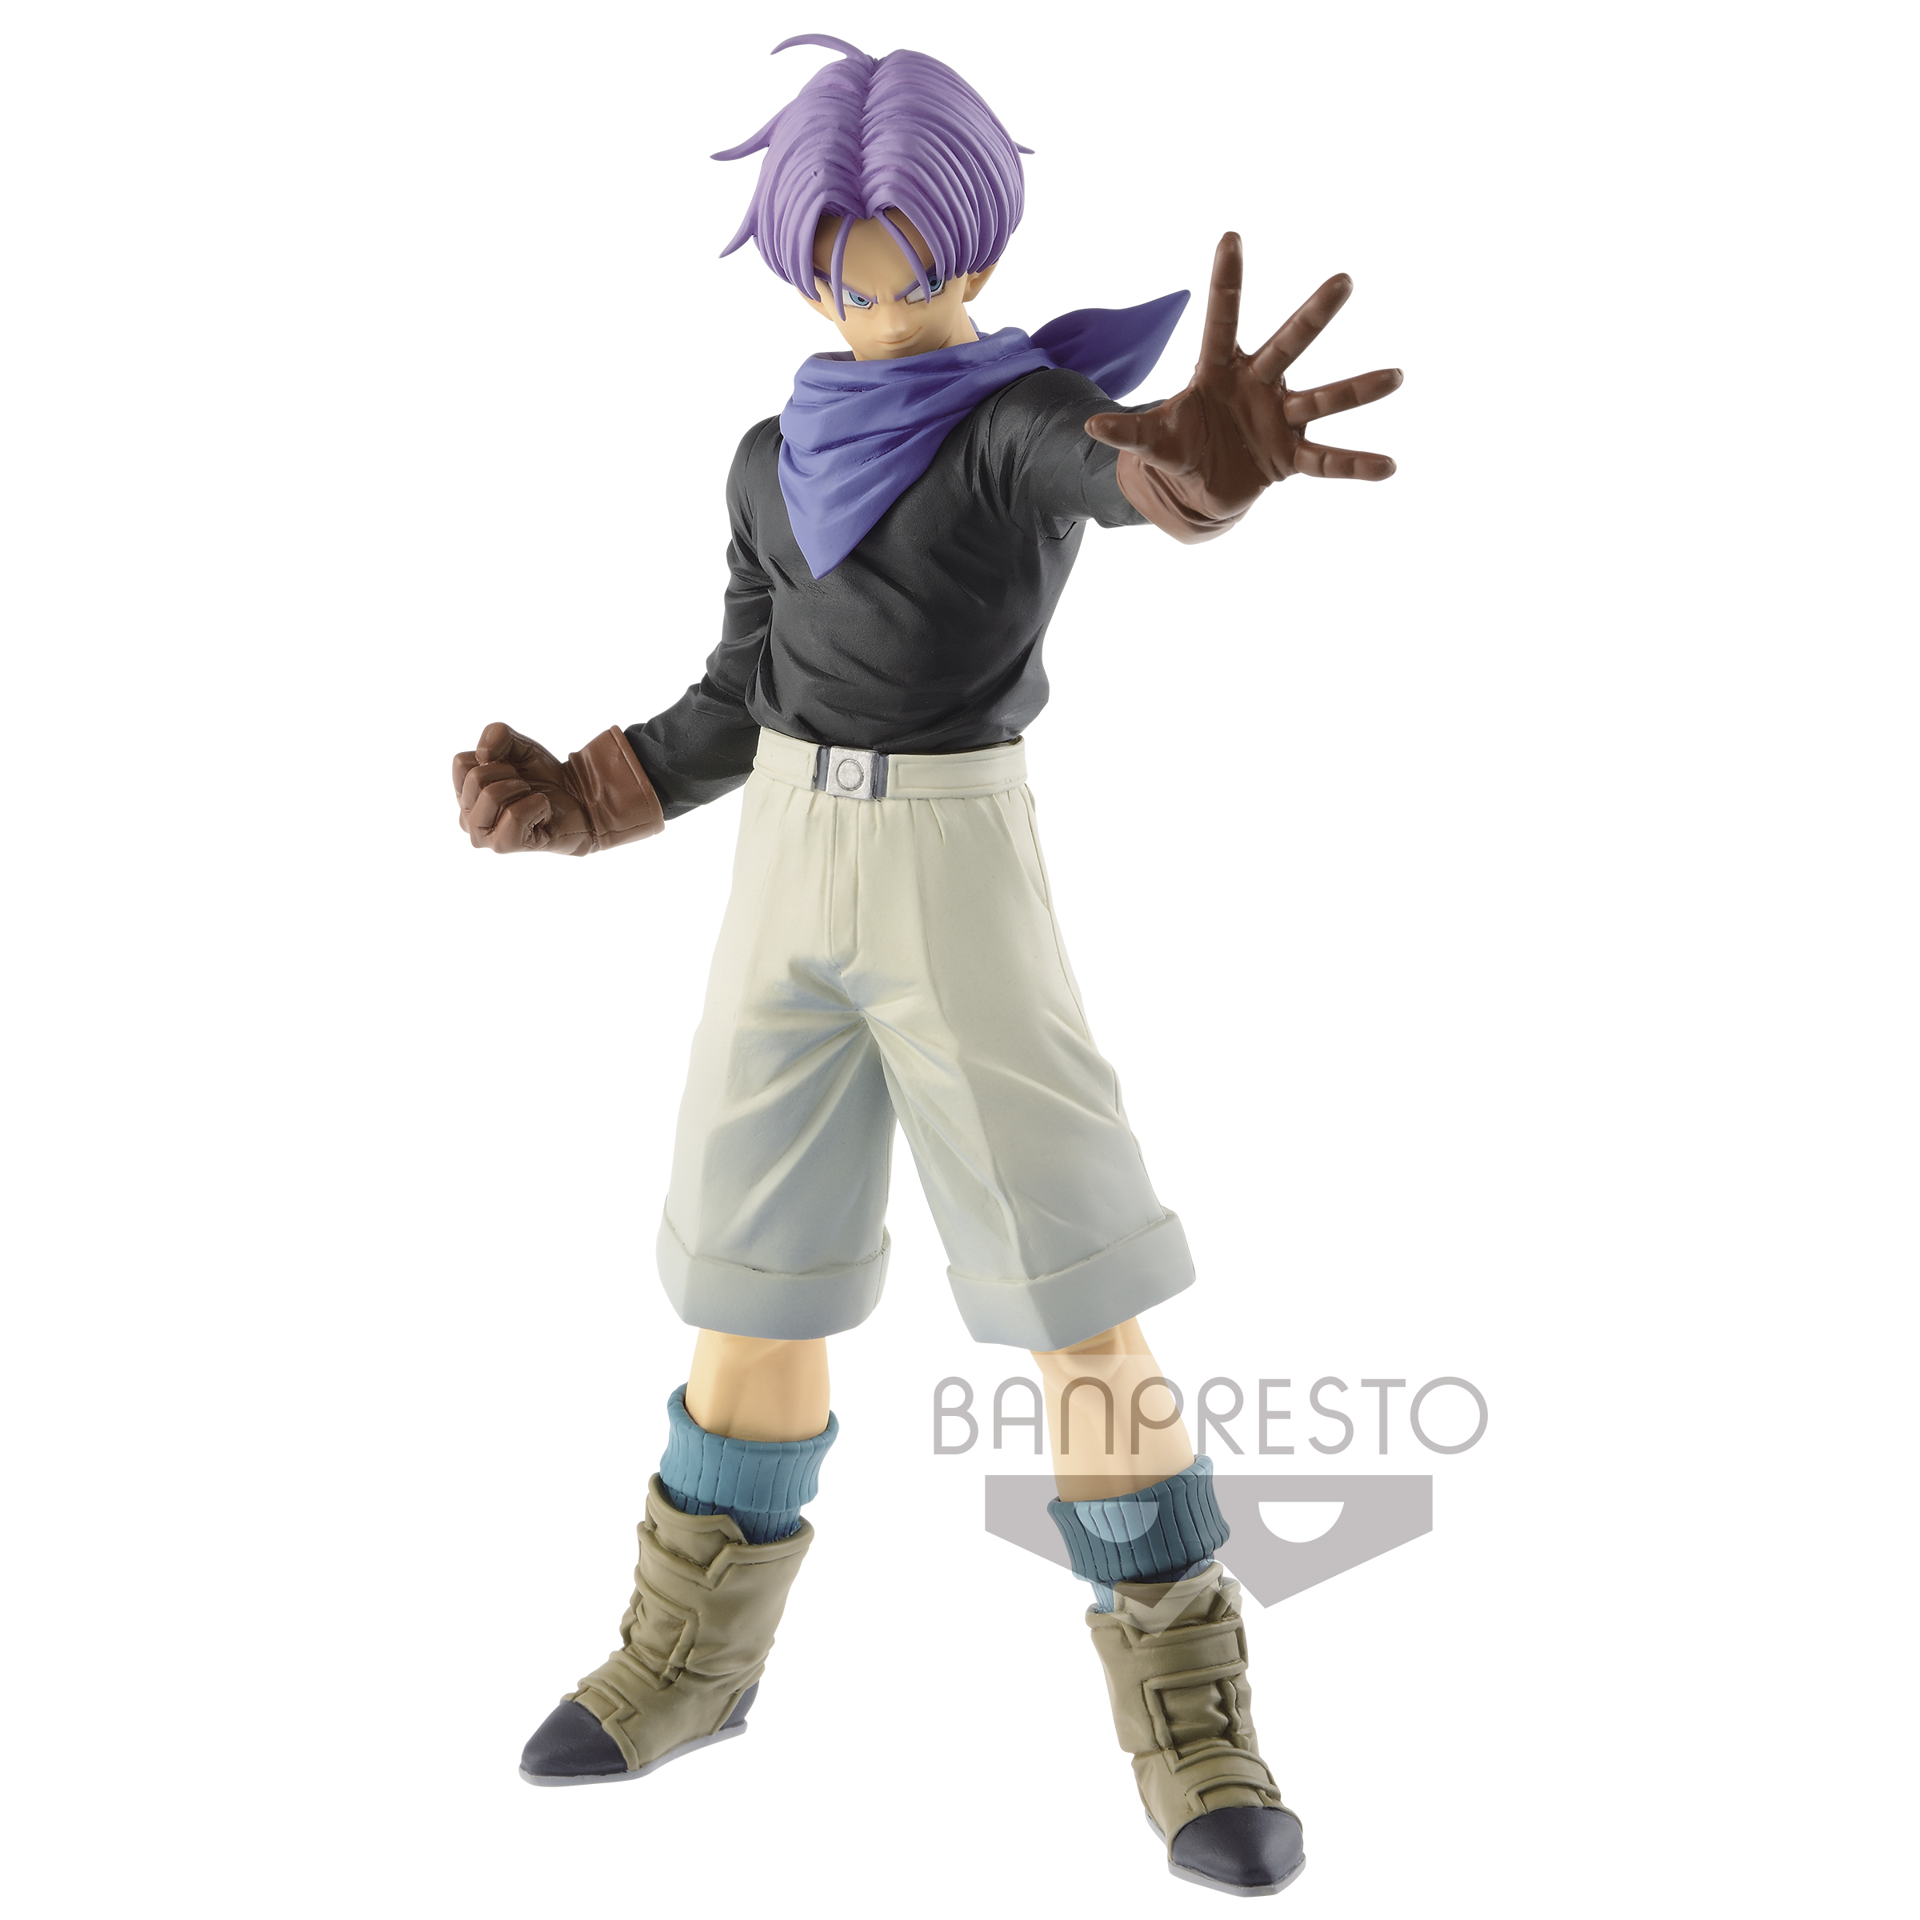 Dragon Ball GT - Ultimate Soldiers Trunks Figure 19cm